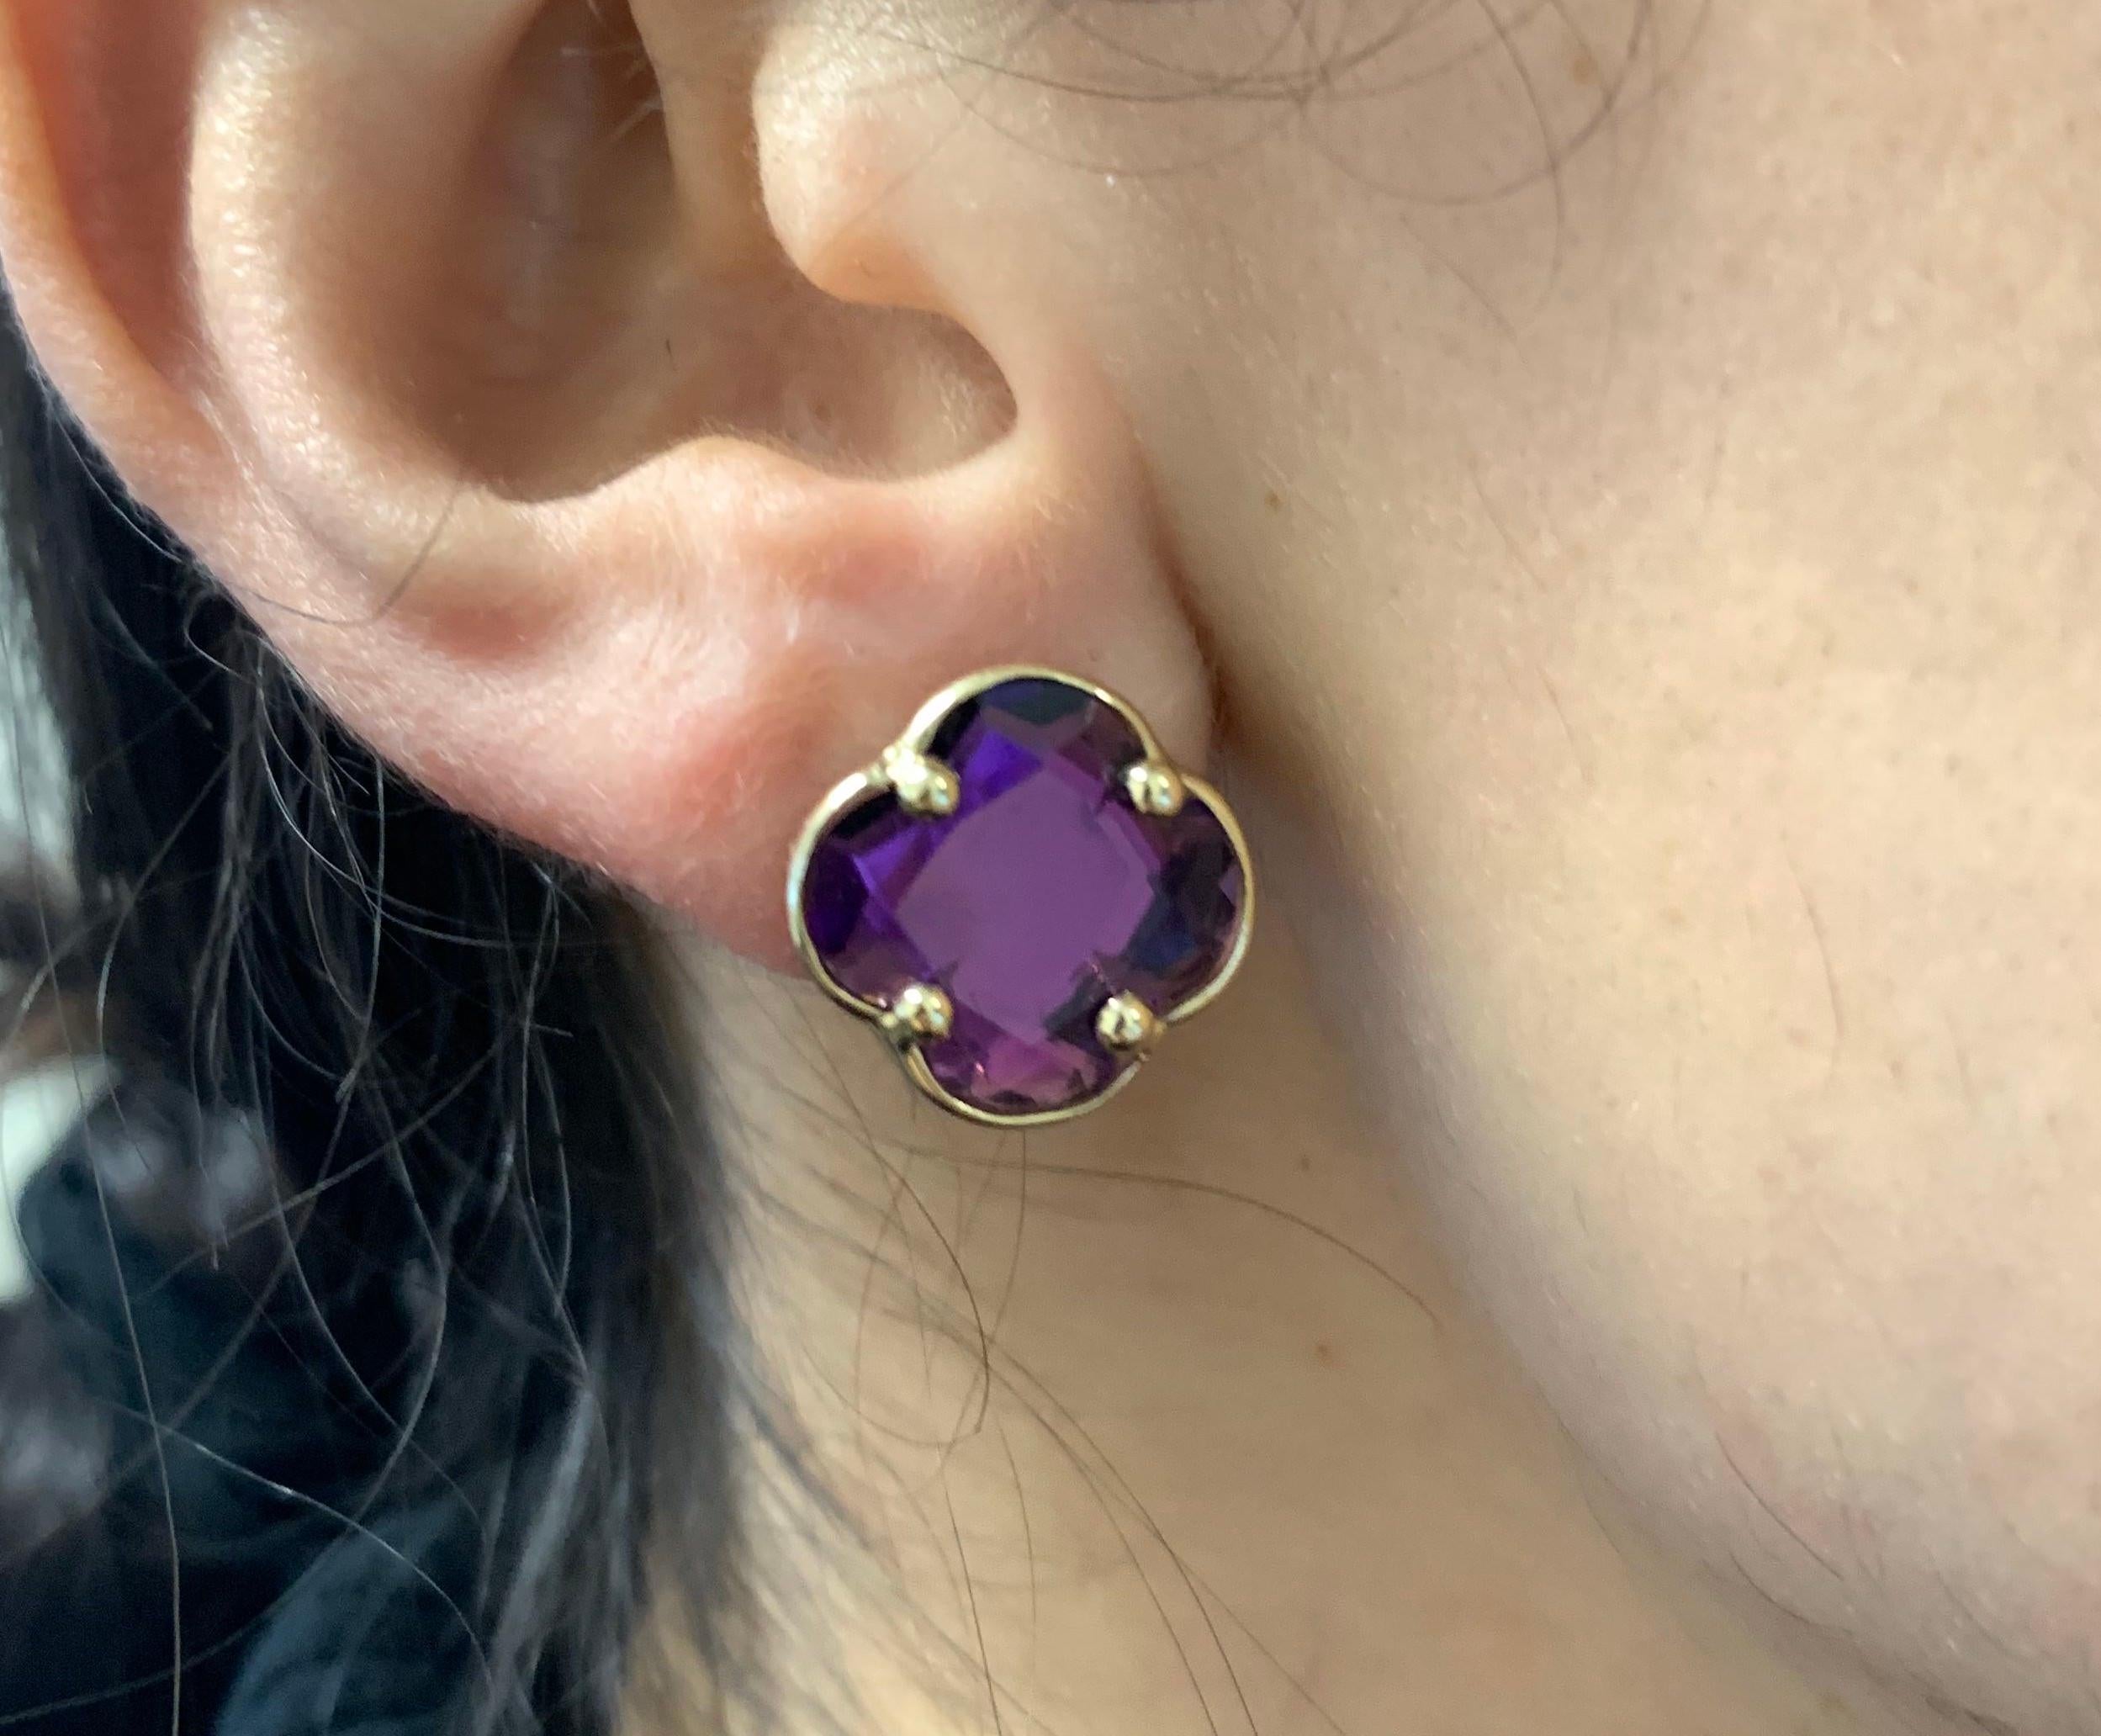 Material: 14k Yellow Gold
Center Stone Details: 2 Amethyst Stones

Fine one-of-a-kind craftsmanship meets incredible quality in this breathtaking piece of jewelry.

All Alberto pieces are made in the U.S.A. and come with a lifetime warranty!